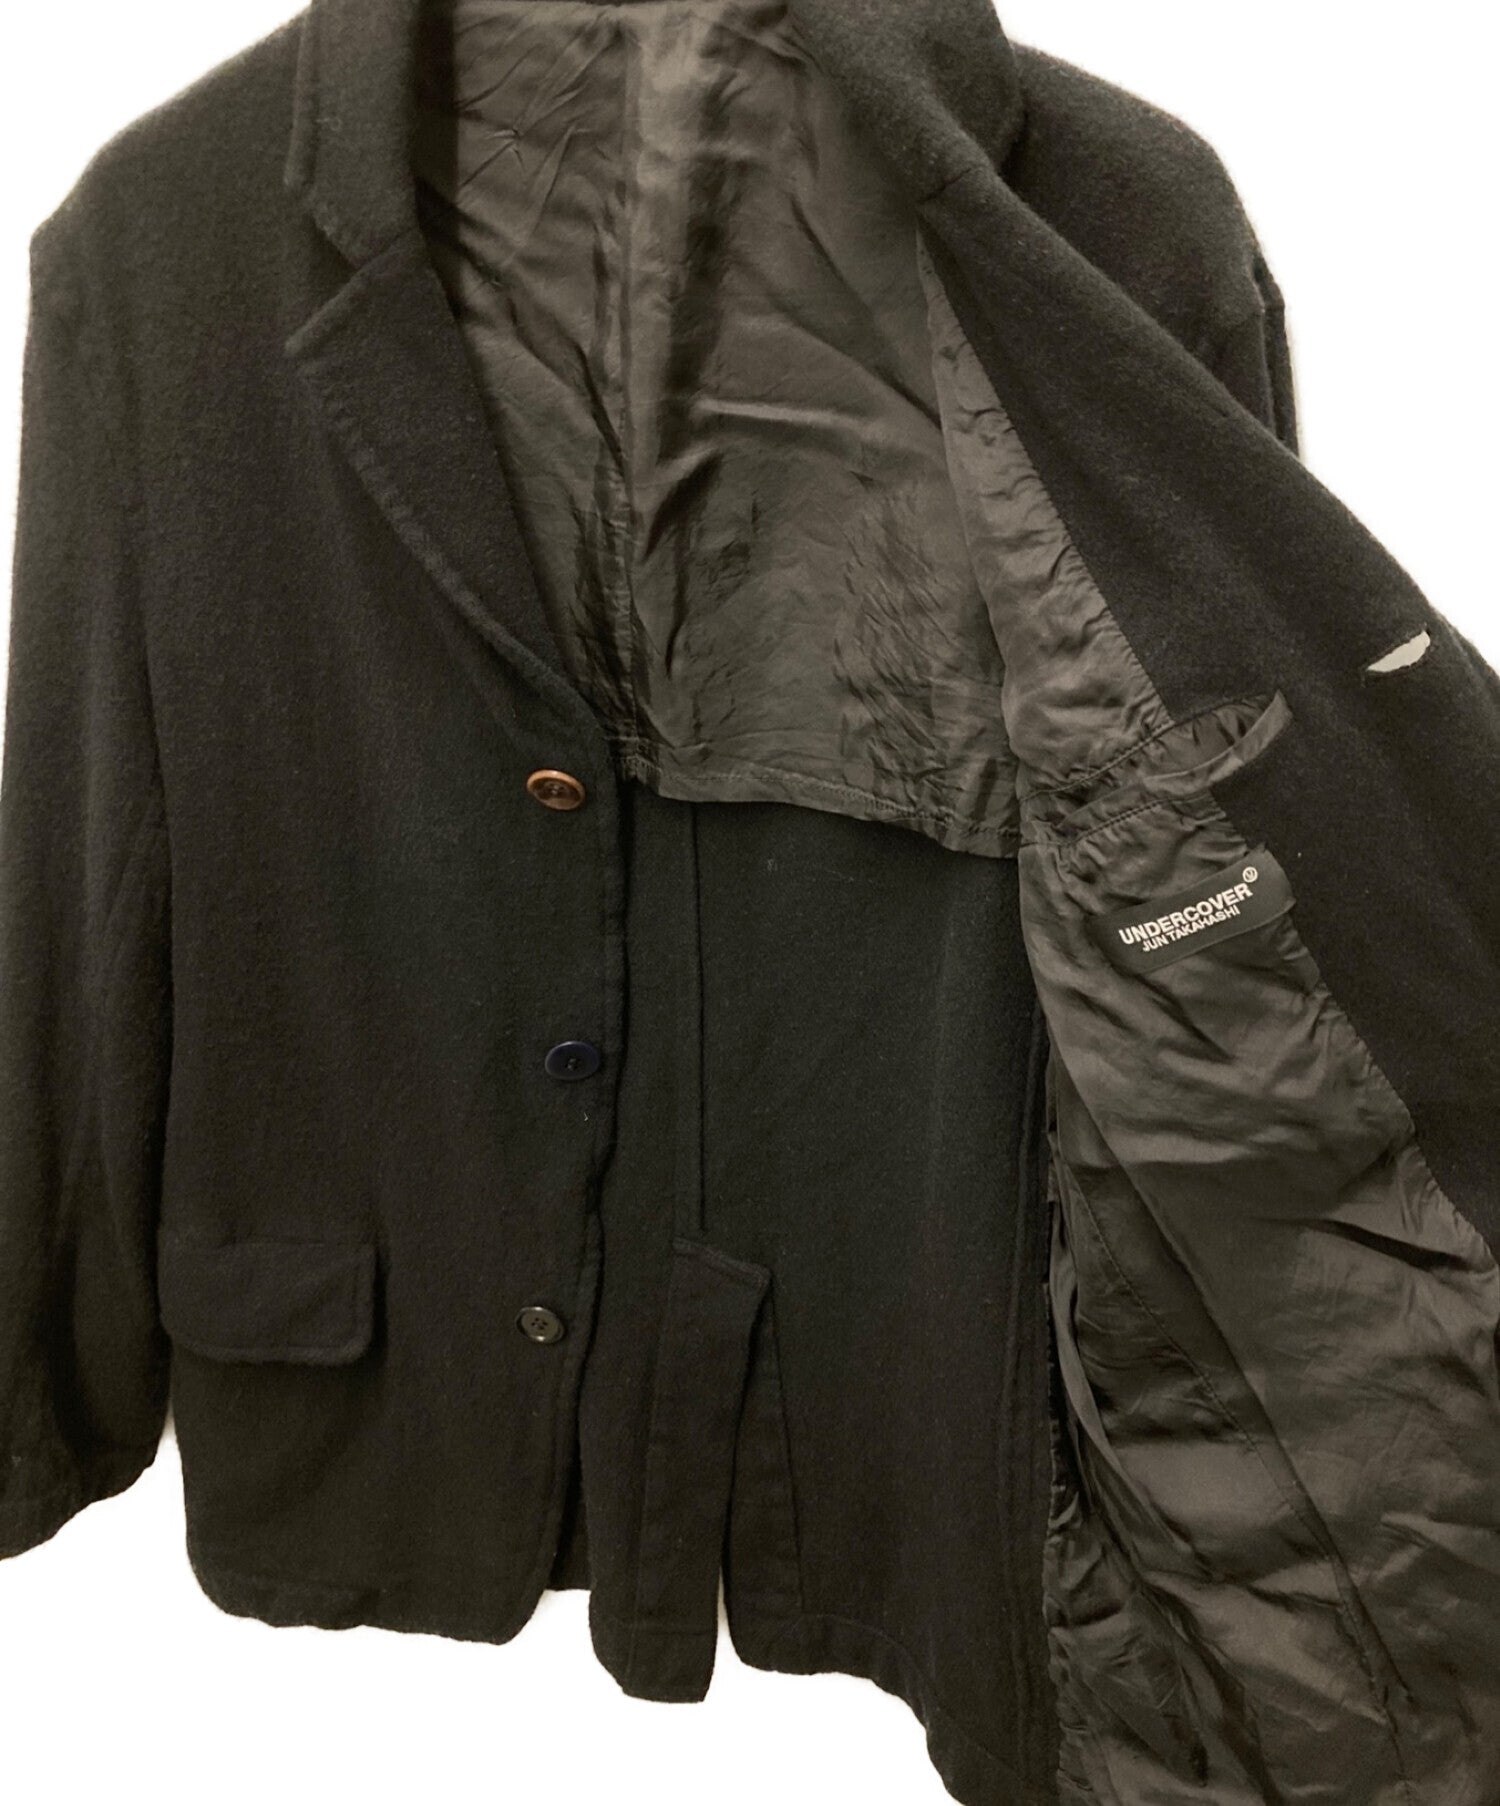 Pre-owned] UNDERCOVER 20AW Wool 3B Jacket UCZ4101-2 | Archive Factory